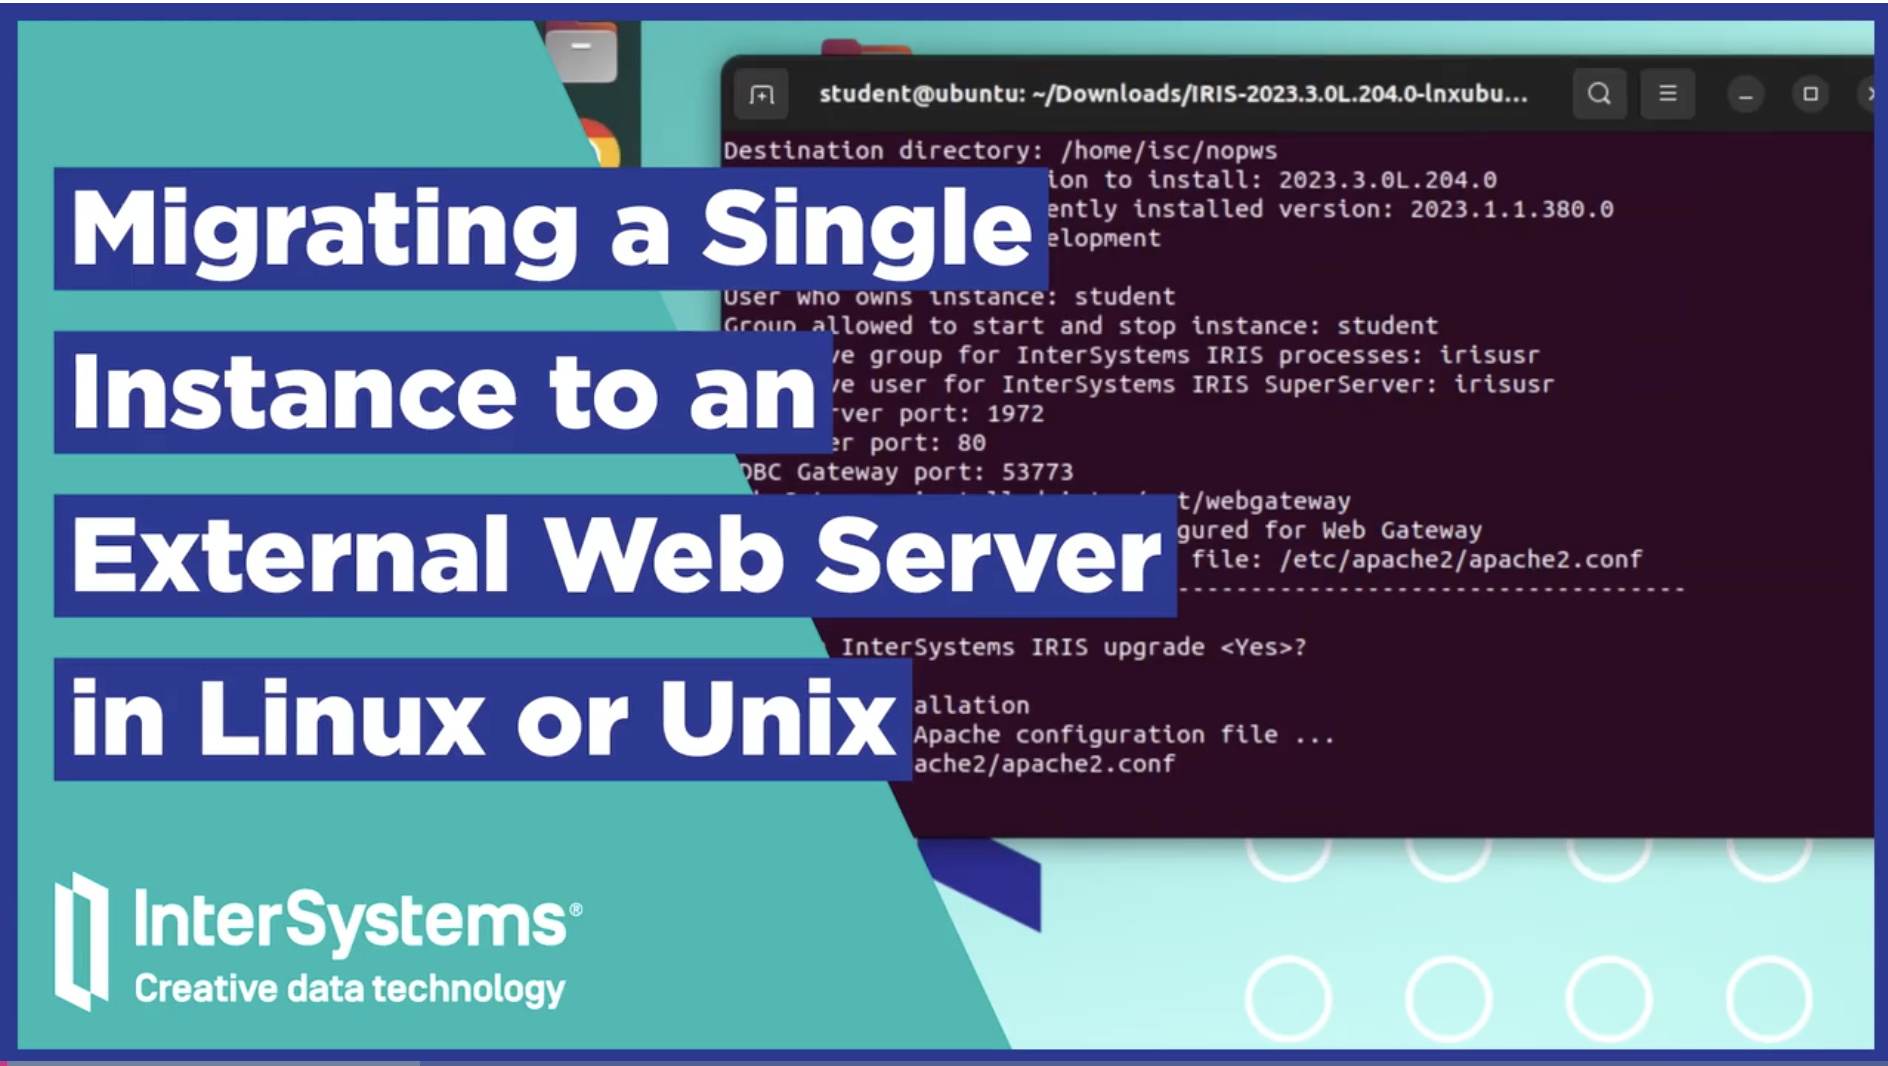 Migrating a Single Instance to an External Web Server in Linux or Unix